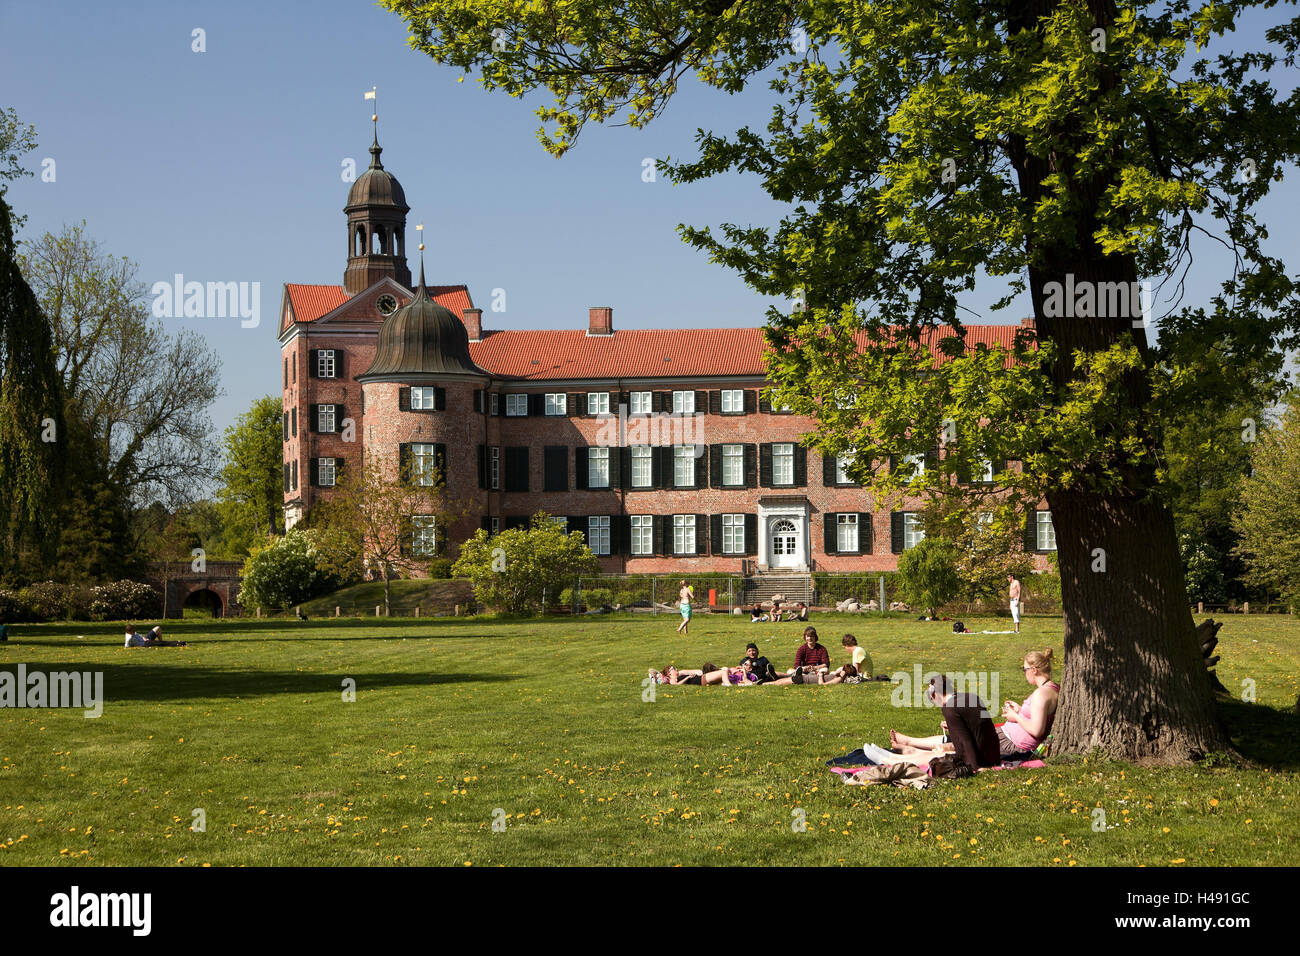 Germany, Schleswig - Holstein, Eutin, lock, meadow, tourist, person, Ostholstein, secular building, architectural style, heaven, blue, sunshine, town, architecture, building, bricks, brick buildings, clock, outside, park, picnic, Stock Photo